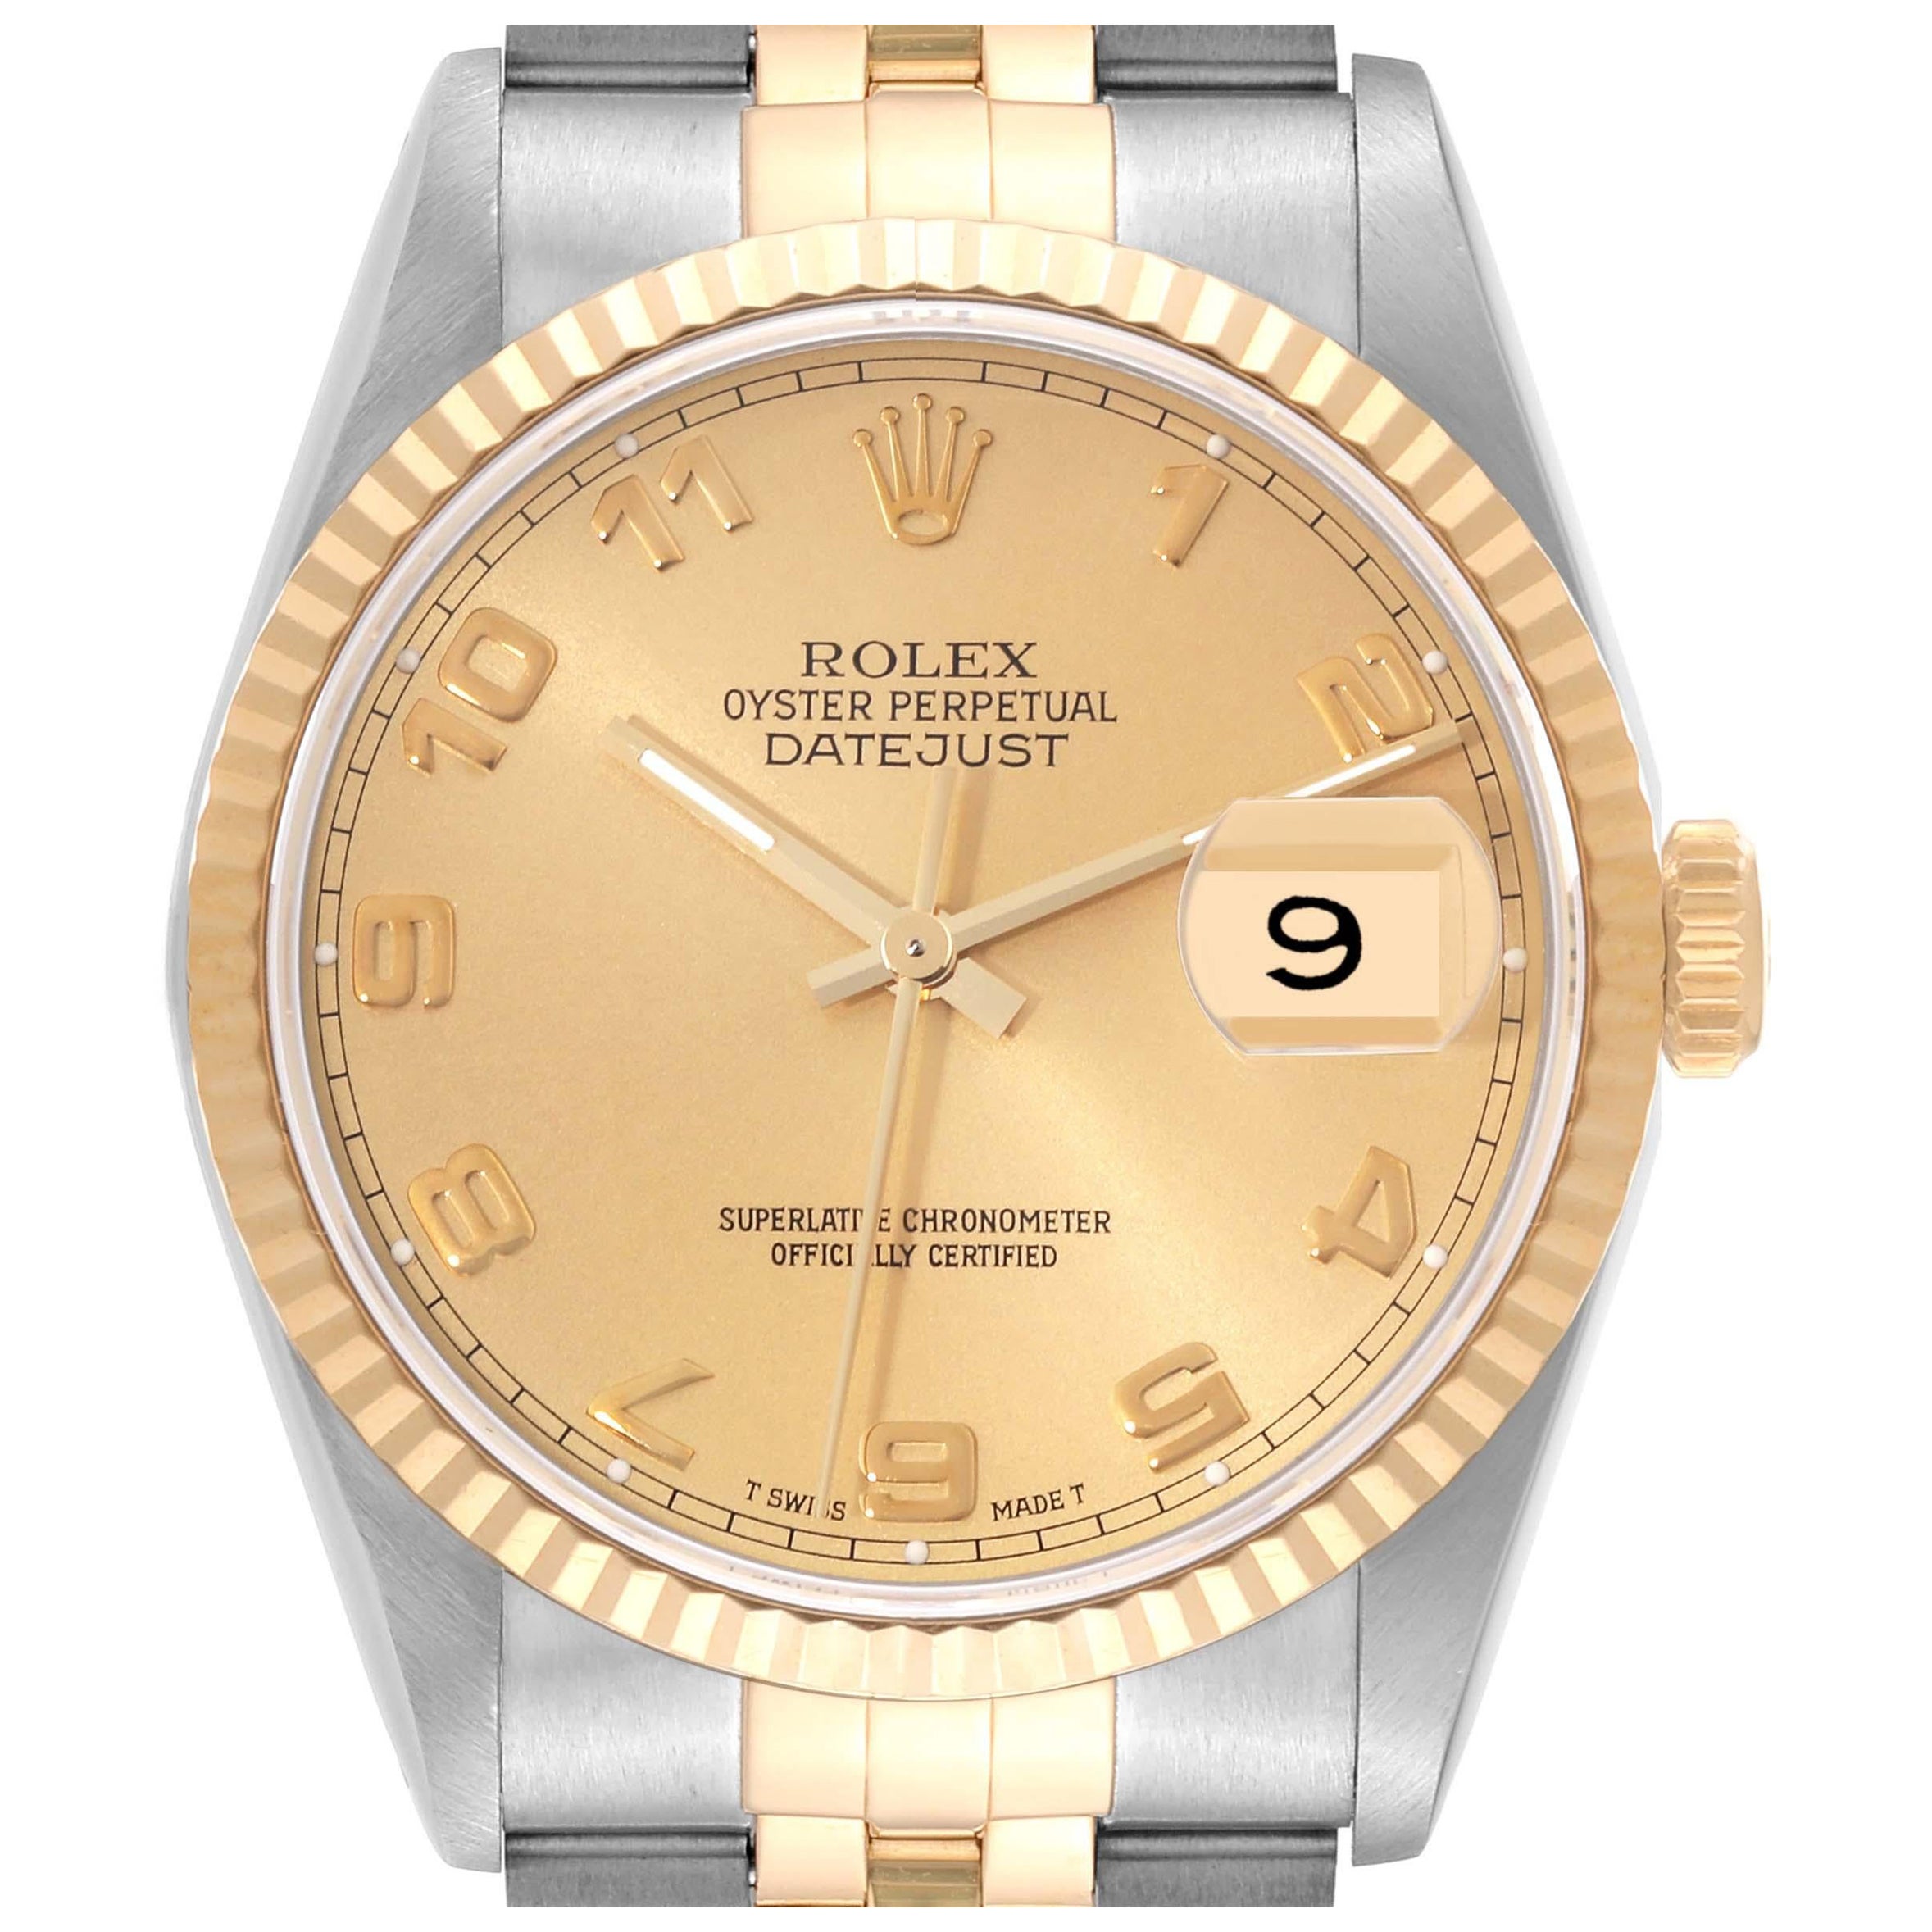 Rolex Datejust Steel Yellow Gold Champagne Arabic Dial Watch 16233 Box Papers